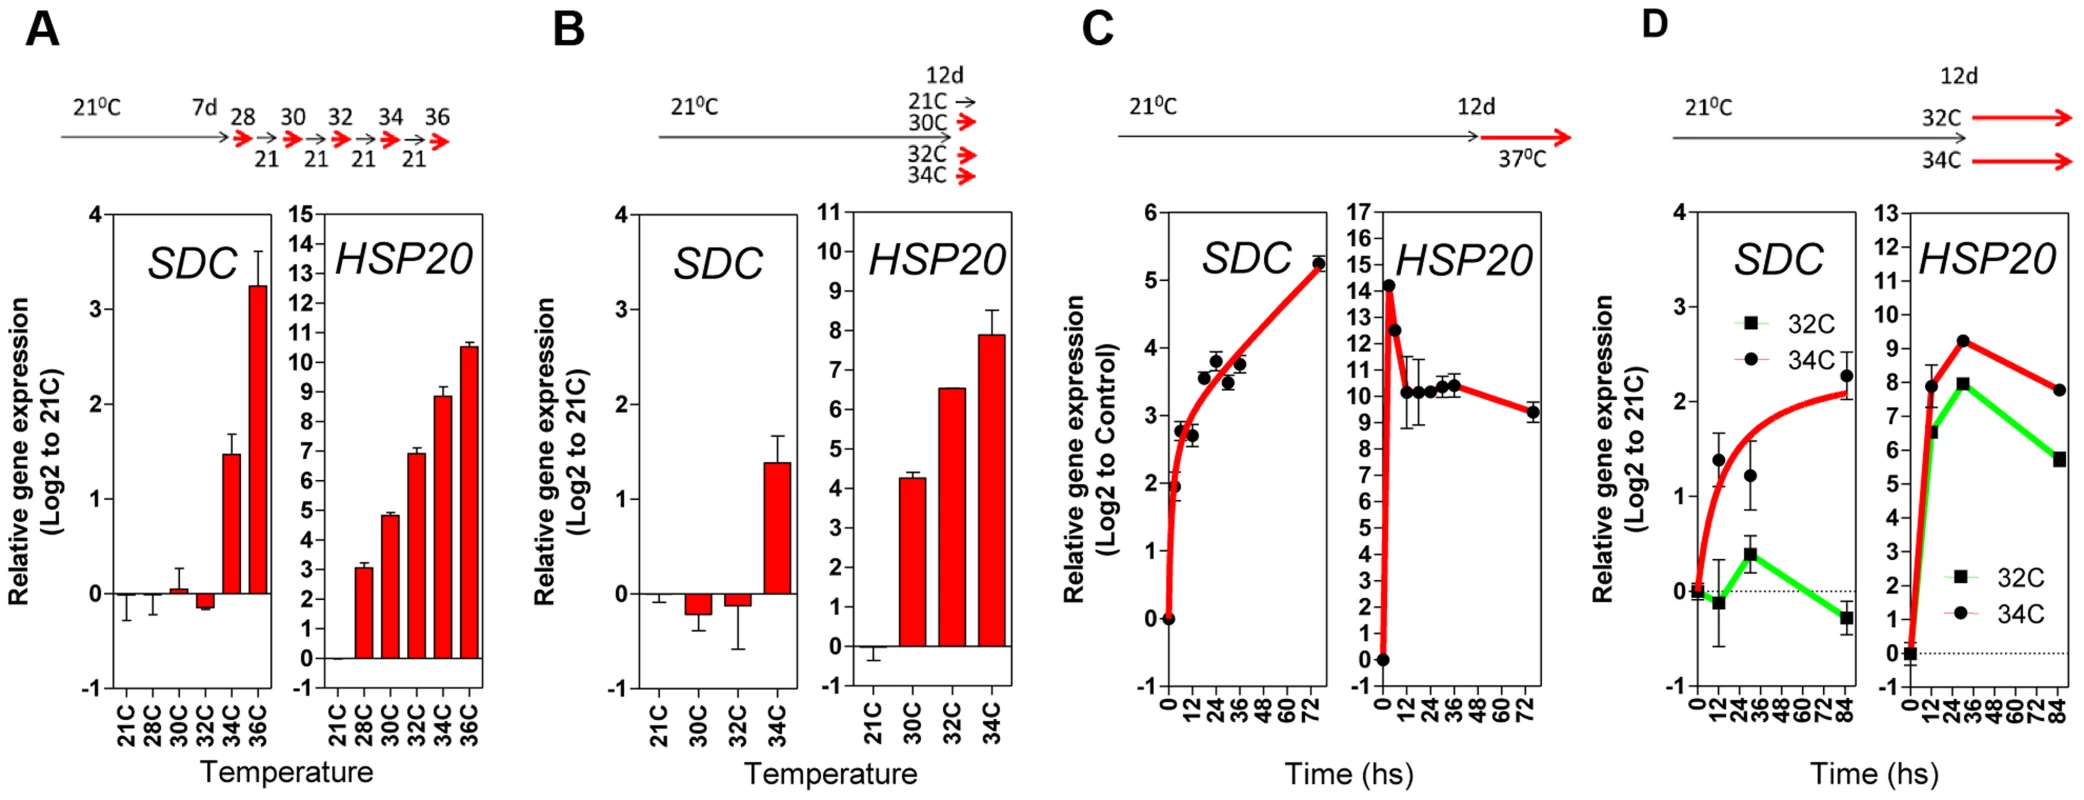 Transcriptional patterns of <i>SDC</i> expression under heat compared to a typical heat-shock gene.